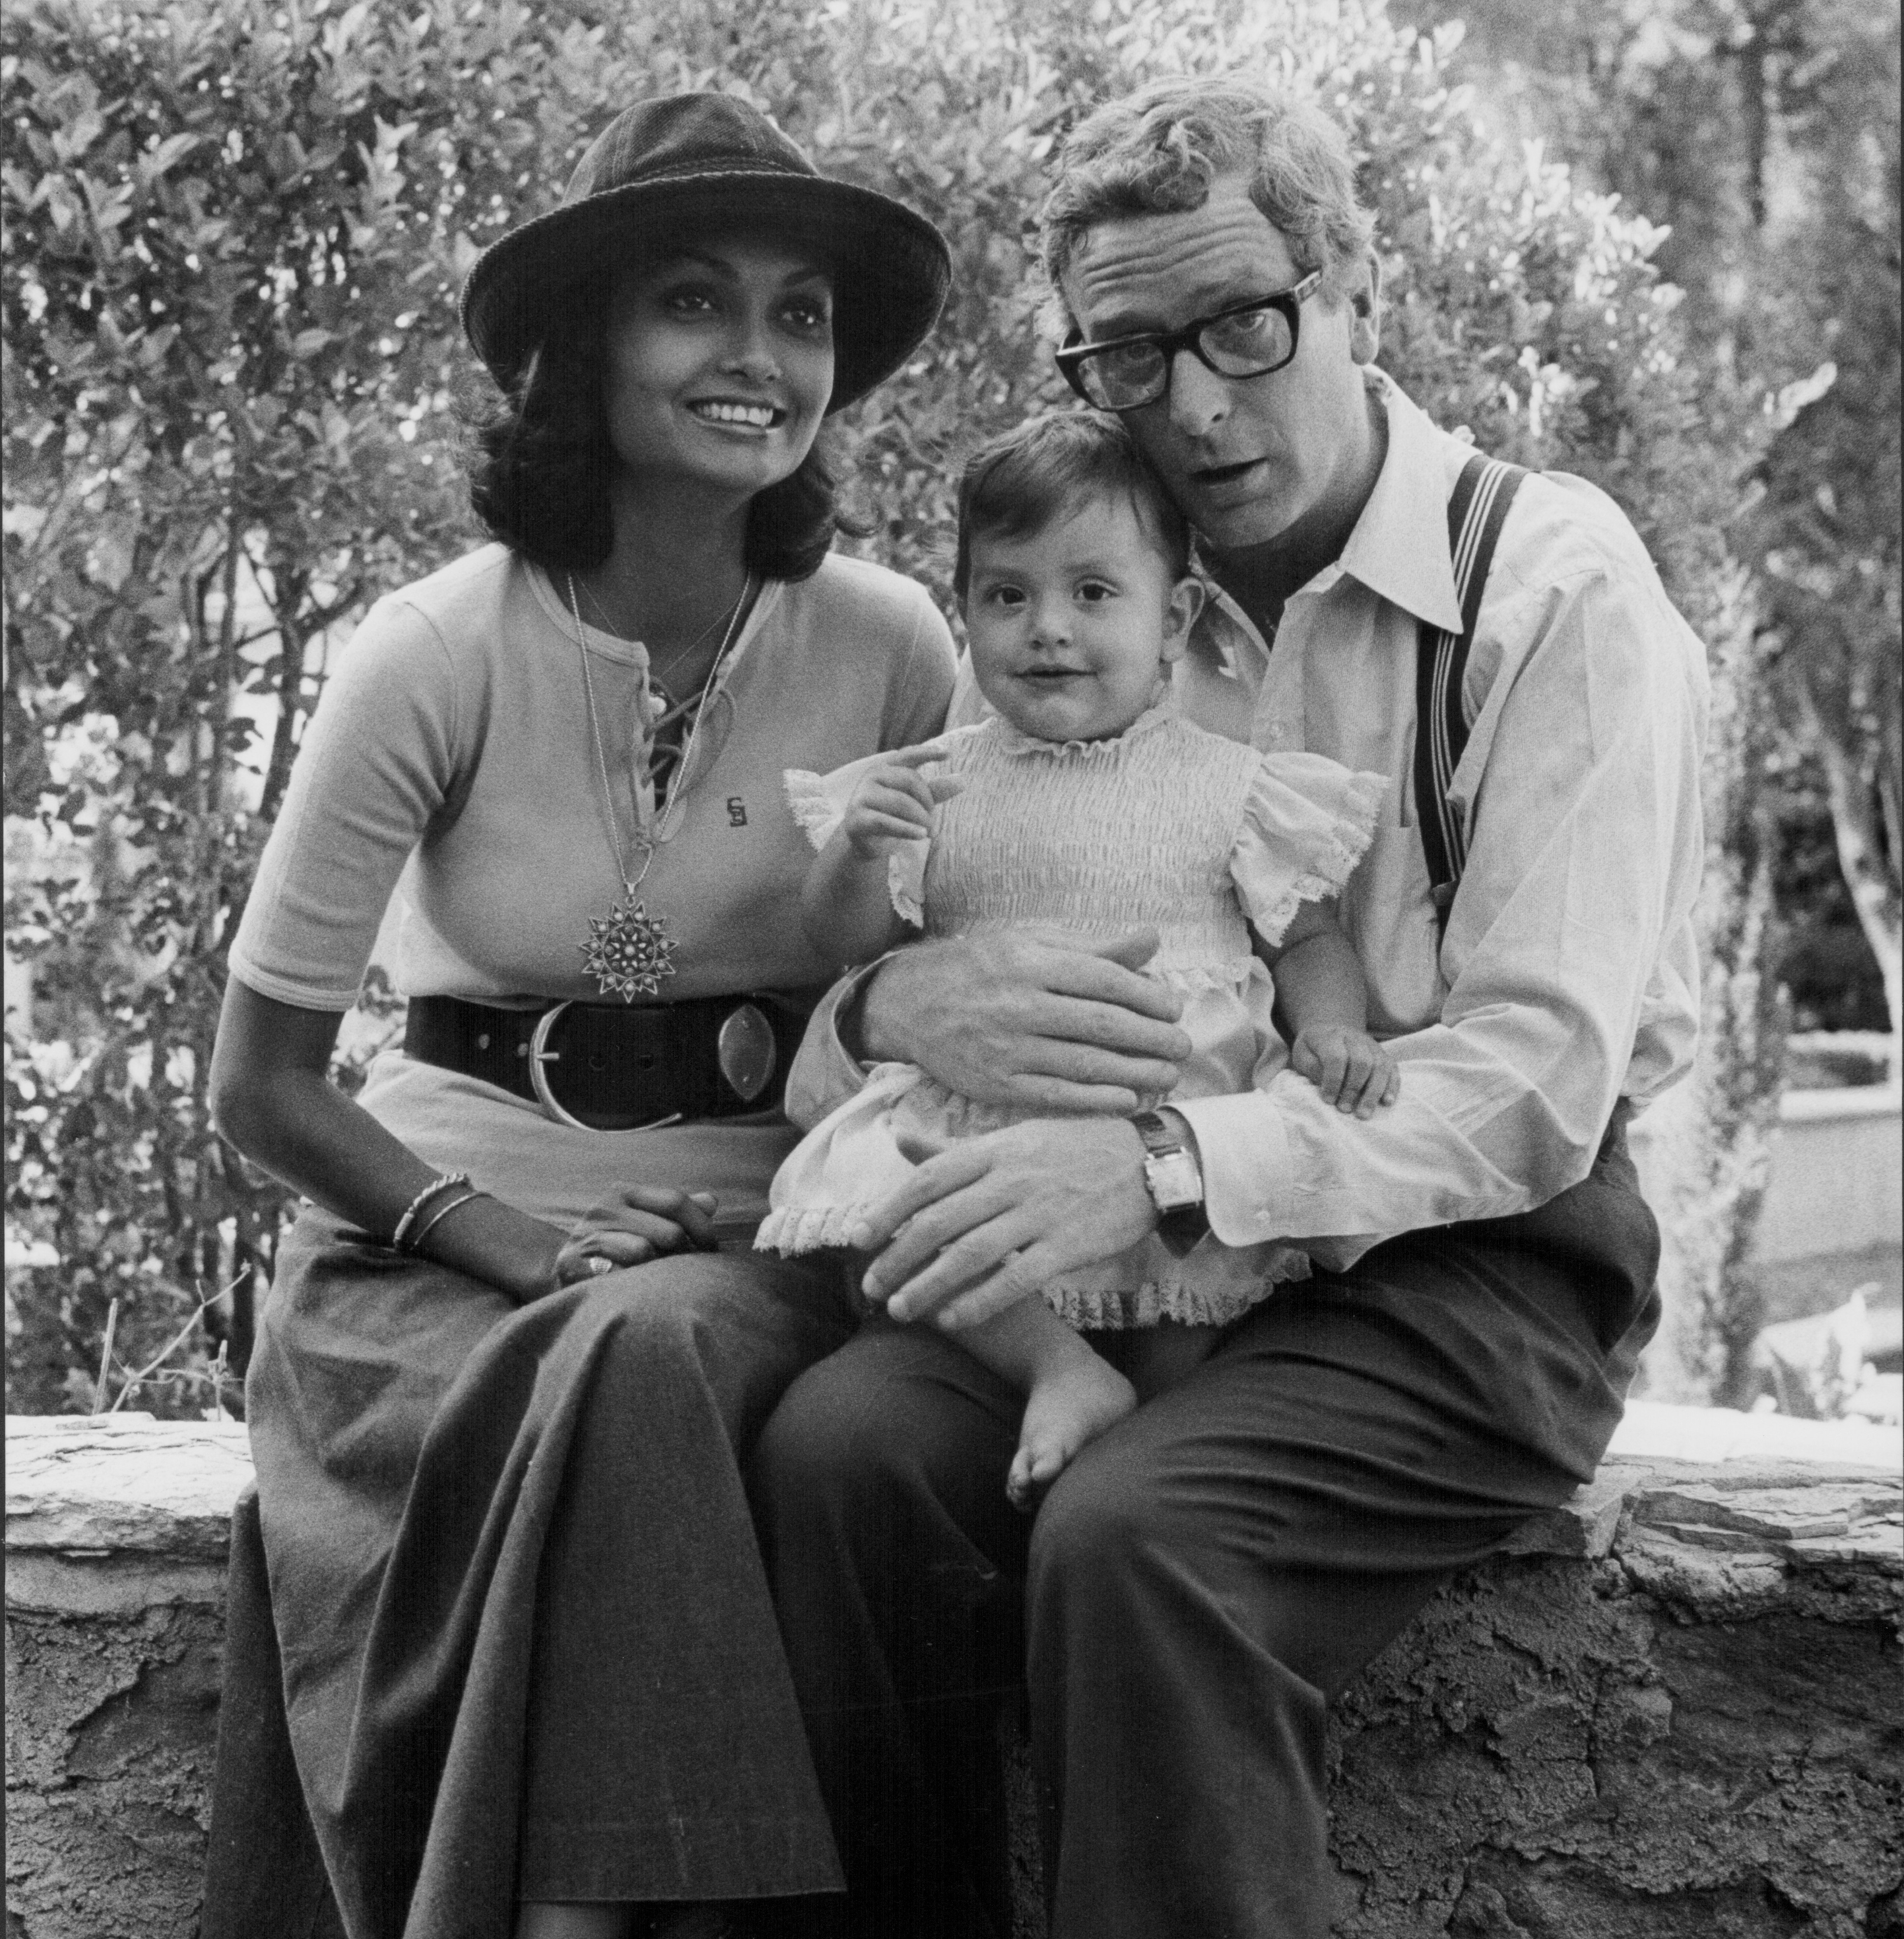 Actor Michael Caine with his wife Shakira Caine and their baby, behind the scenes of the movie "Peeper," circa 1976. | Photo: Getty Images